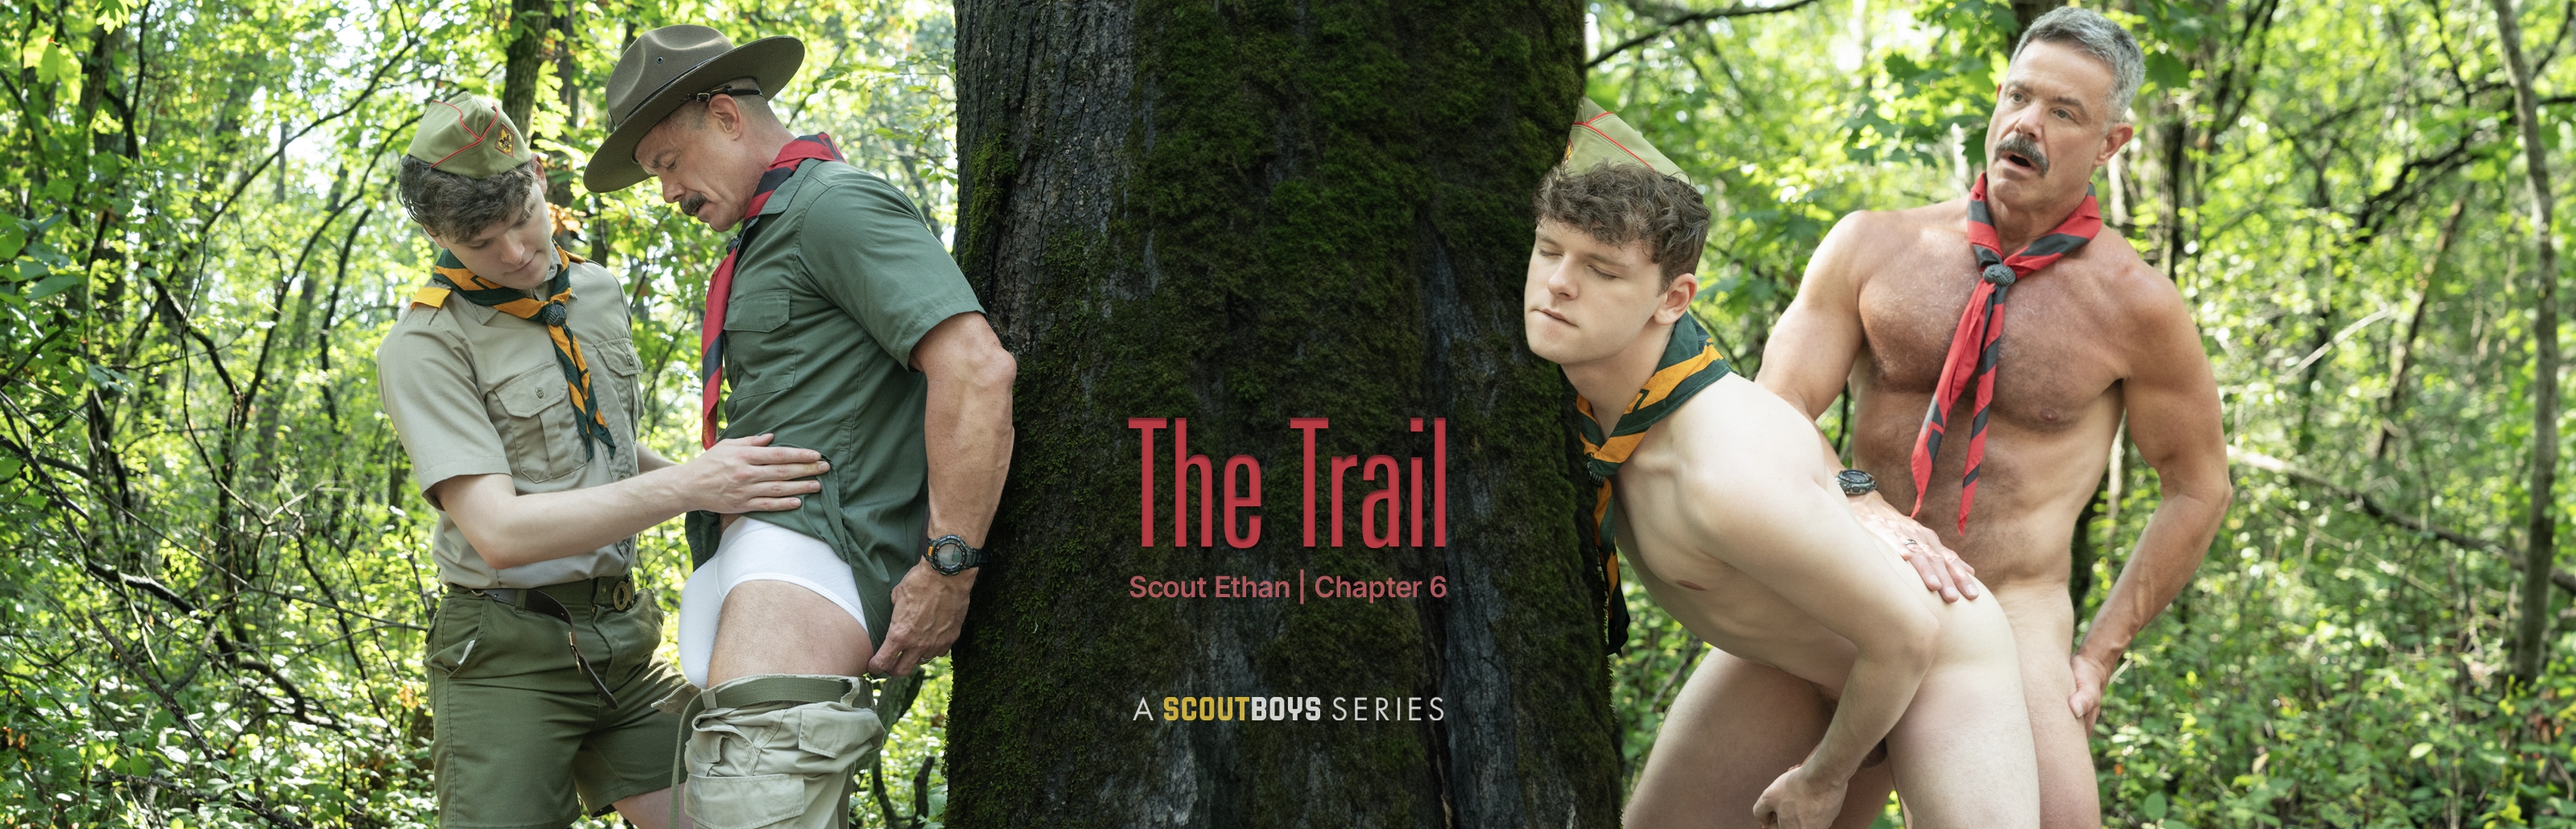 The Trail | SCOUT ETHAN | Chapter 6 Photos 97